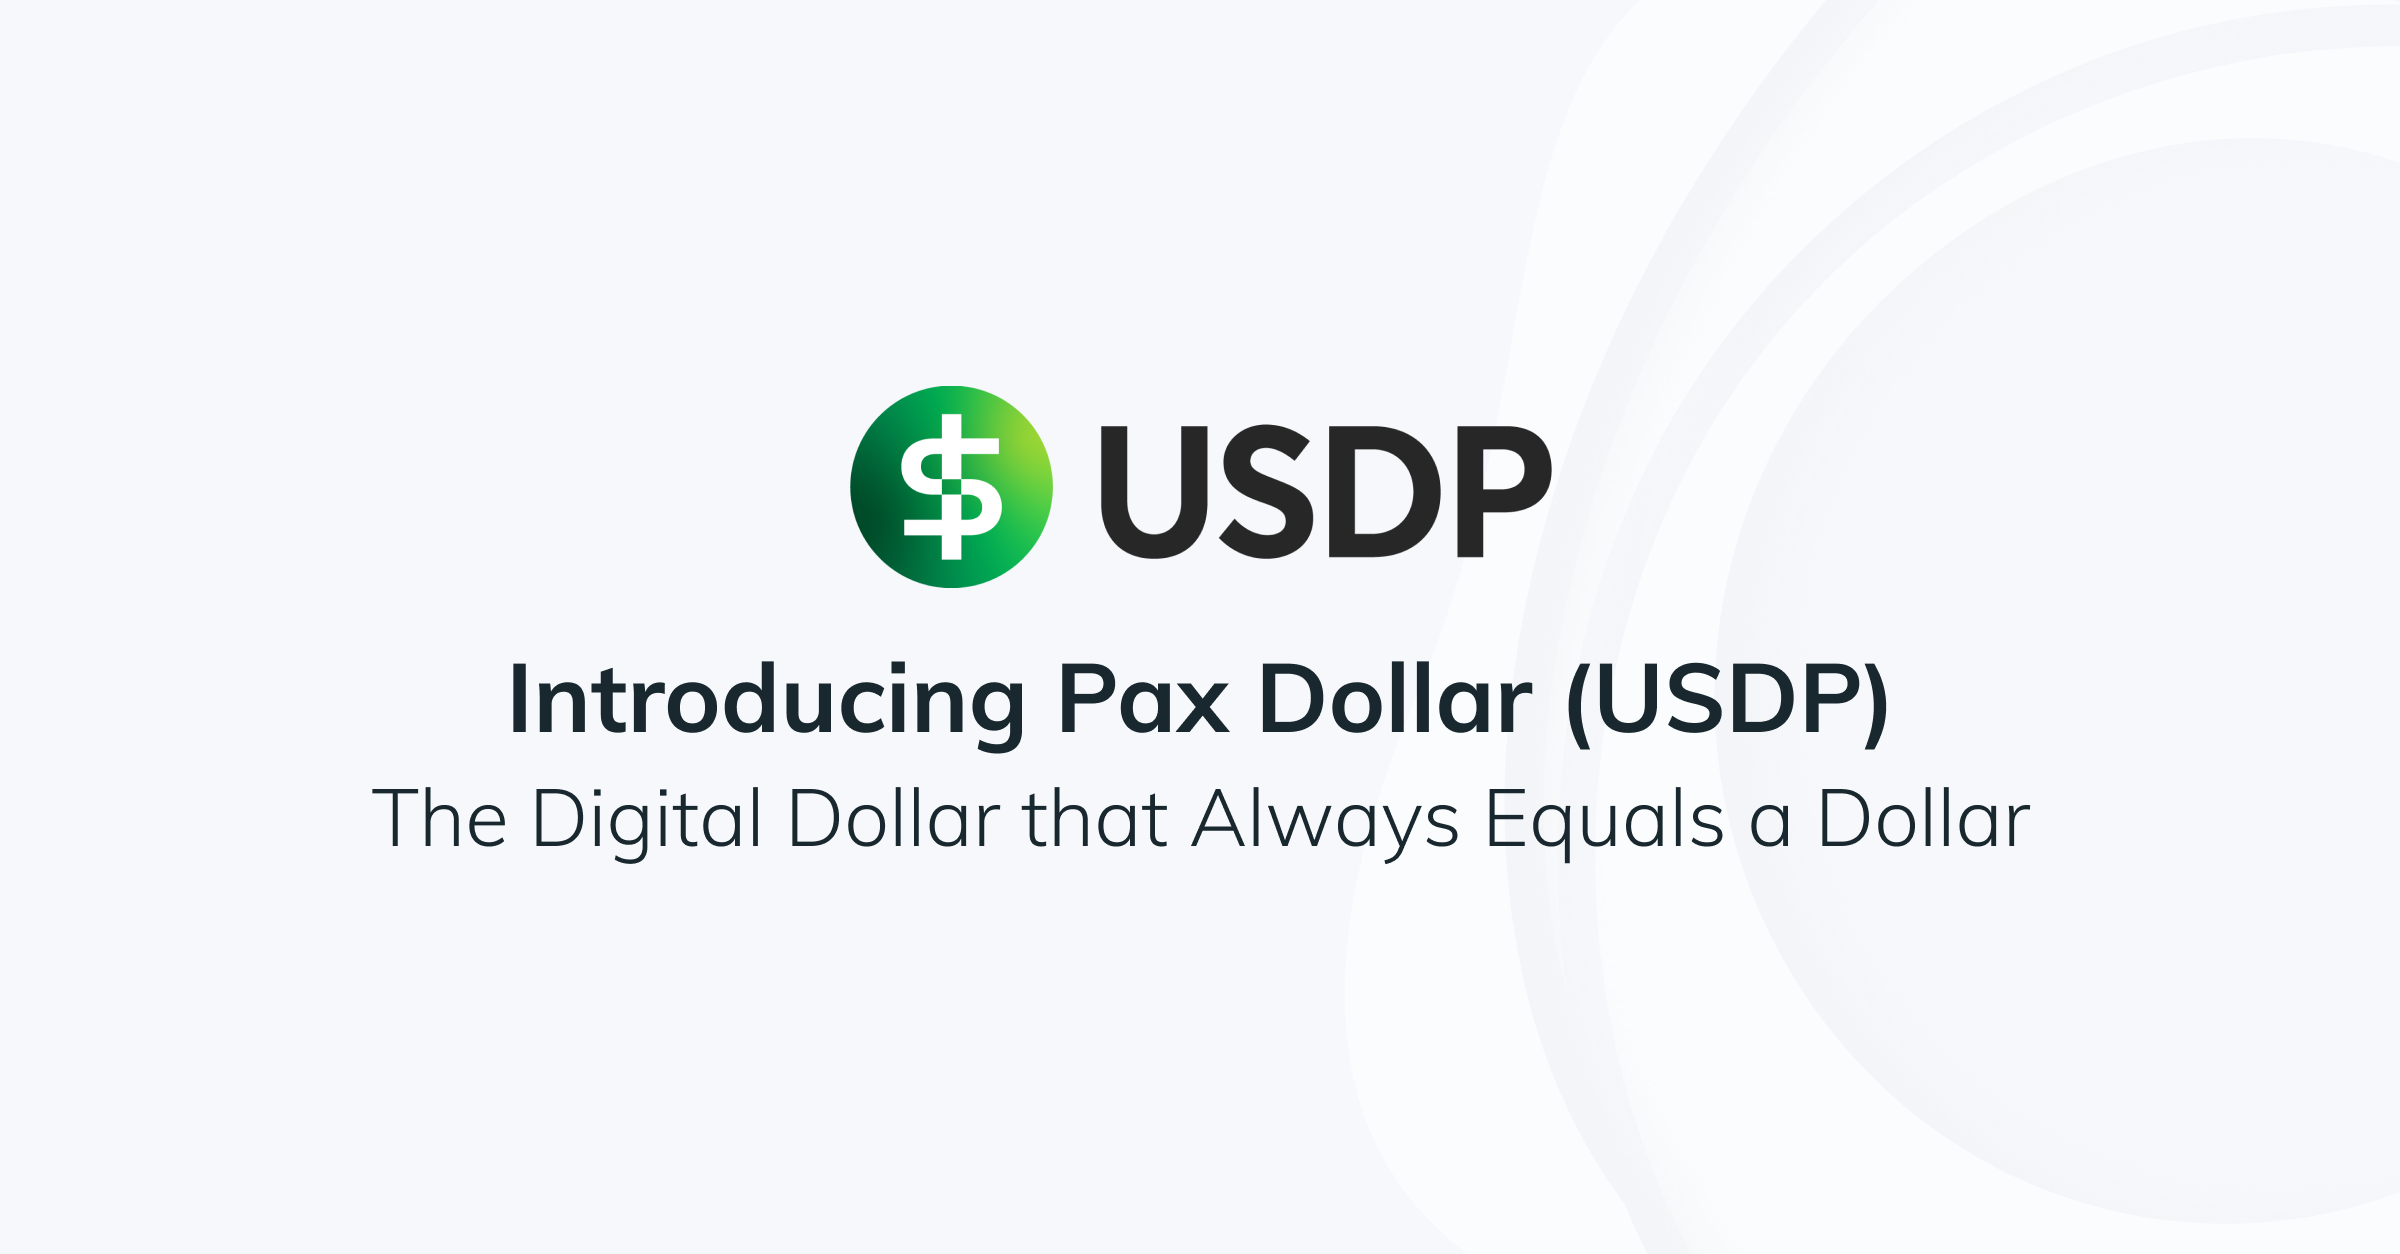 The potential risks and rewards of investing in Pax Dollar (USDP)